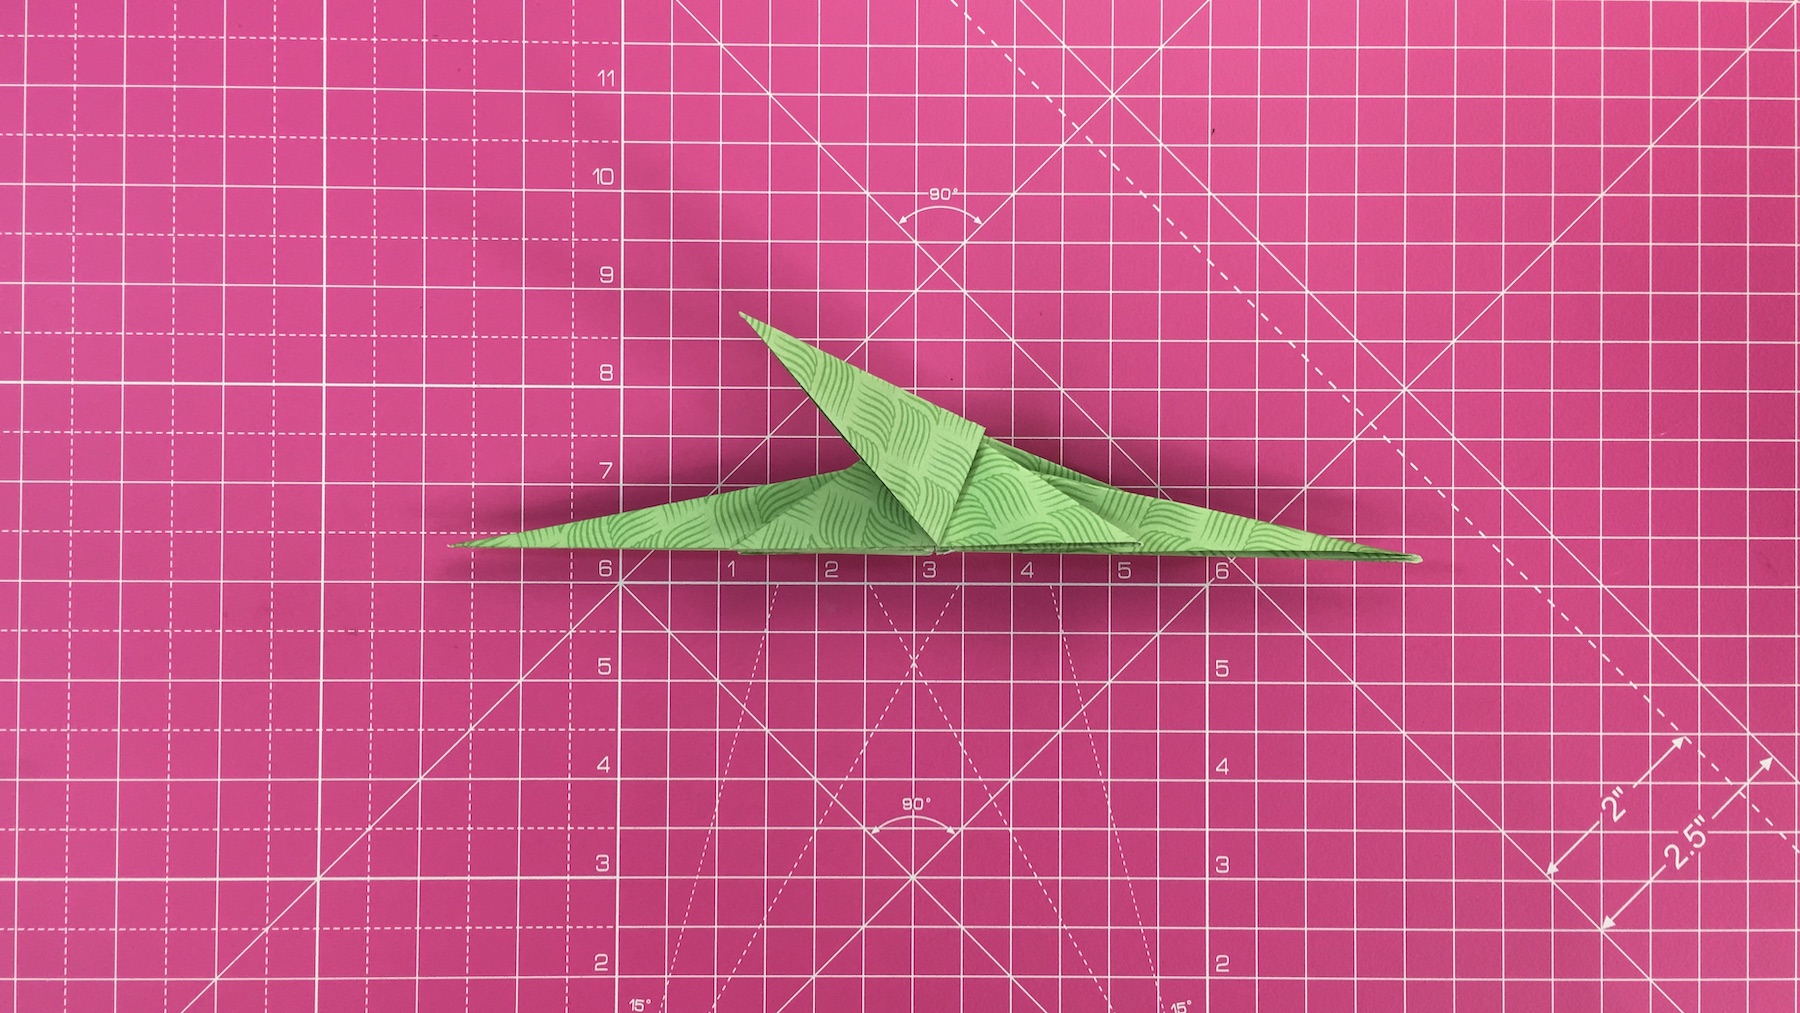 How to make an origami dragon, origami dragon tutorial - step 35